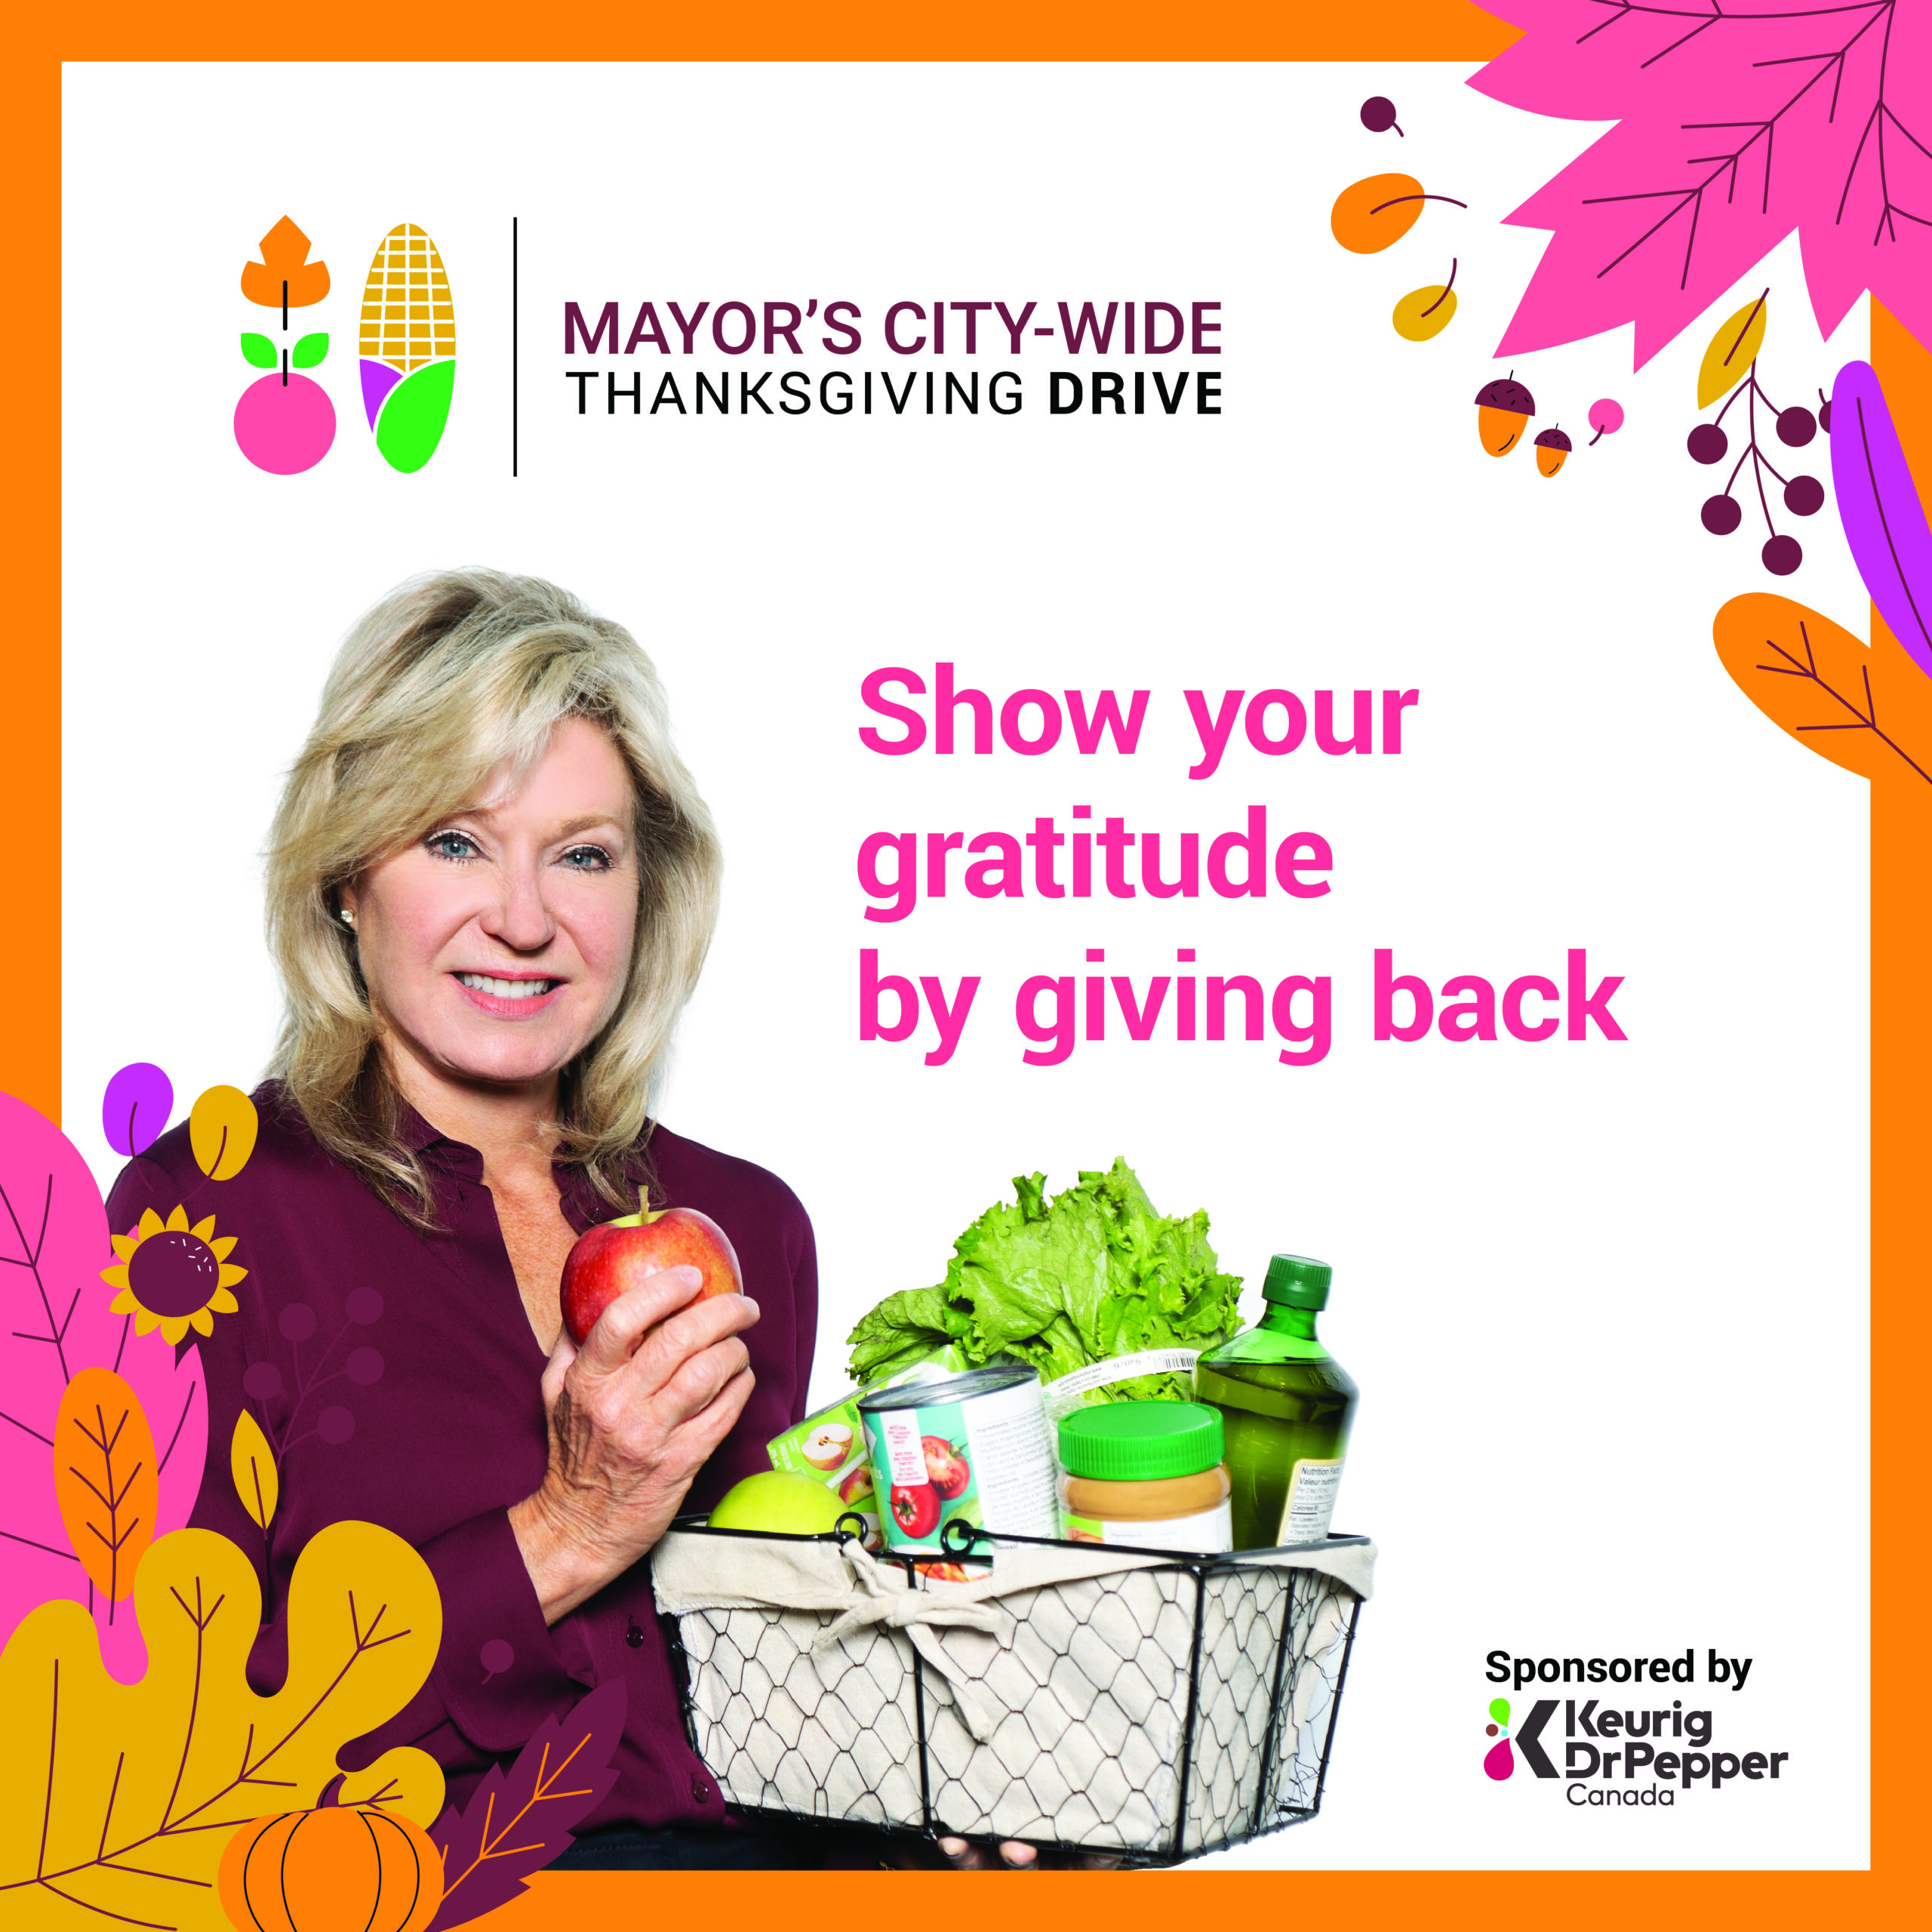 Promotional poster of Mississauga Food Bank's Thanksgiving Drive Campaign featuring a photo of Mississauga Mayor Bonnie Crombie